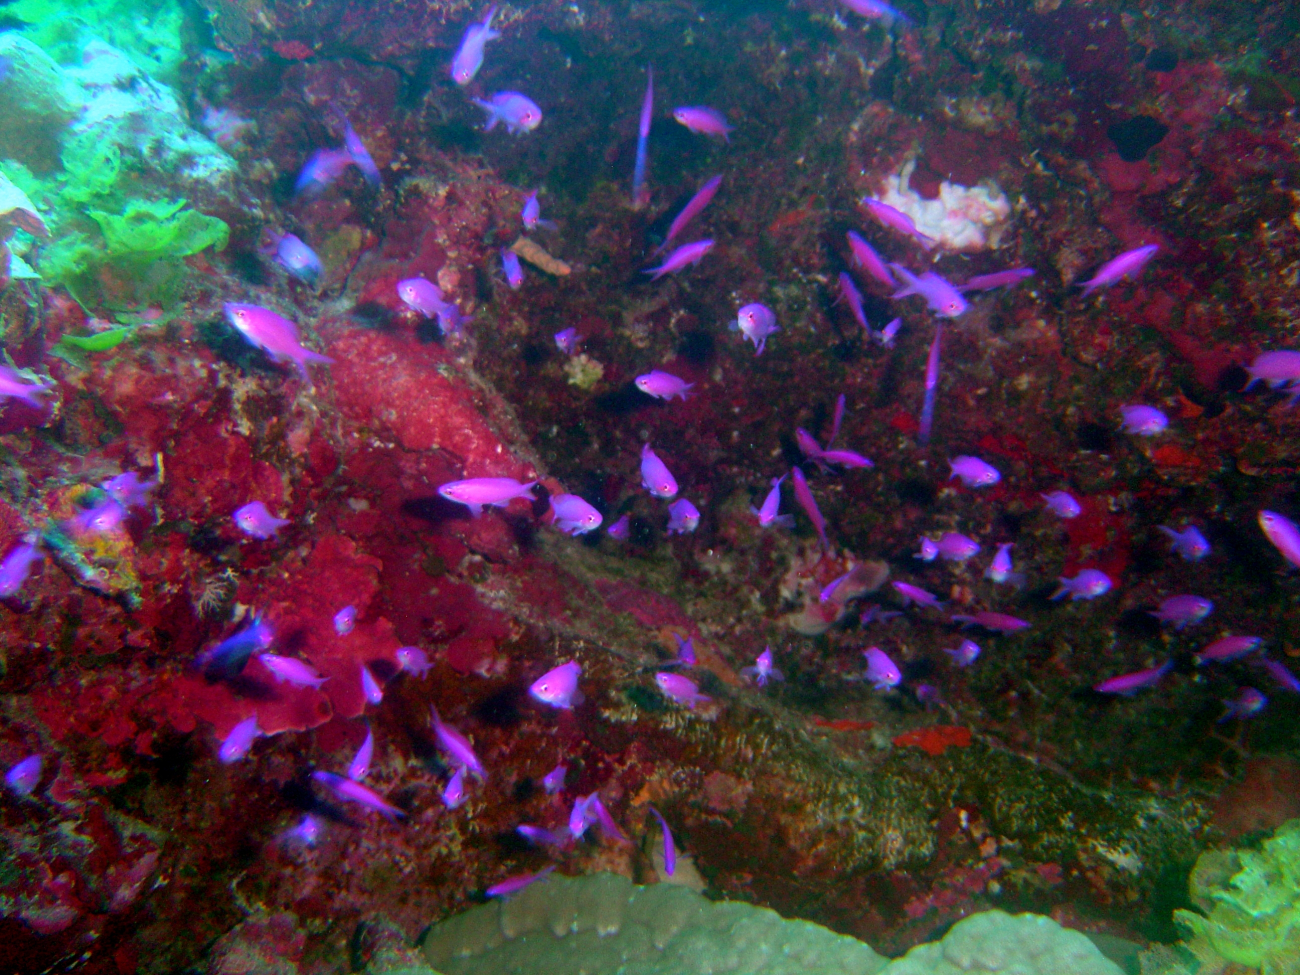 Reef scene with school of purple queen fish (Pseudanthias pascalus)